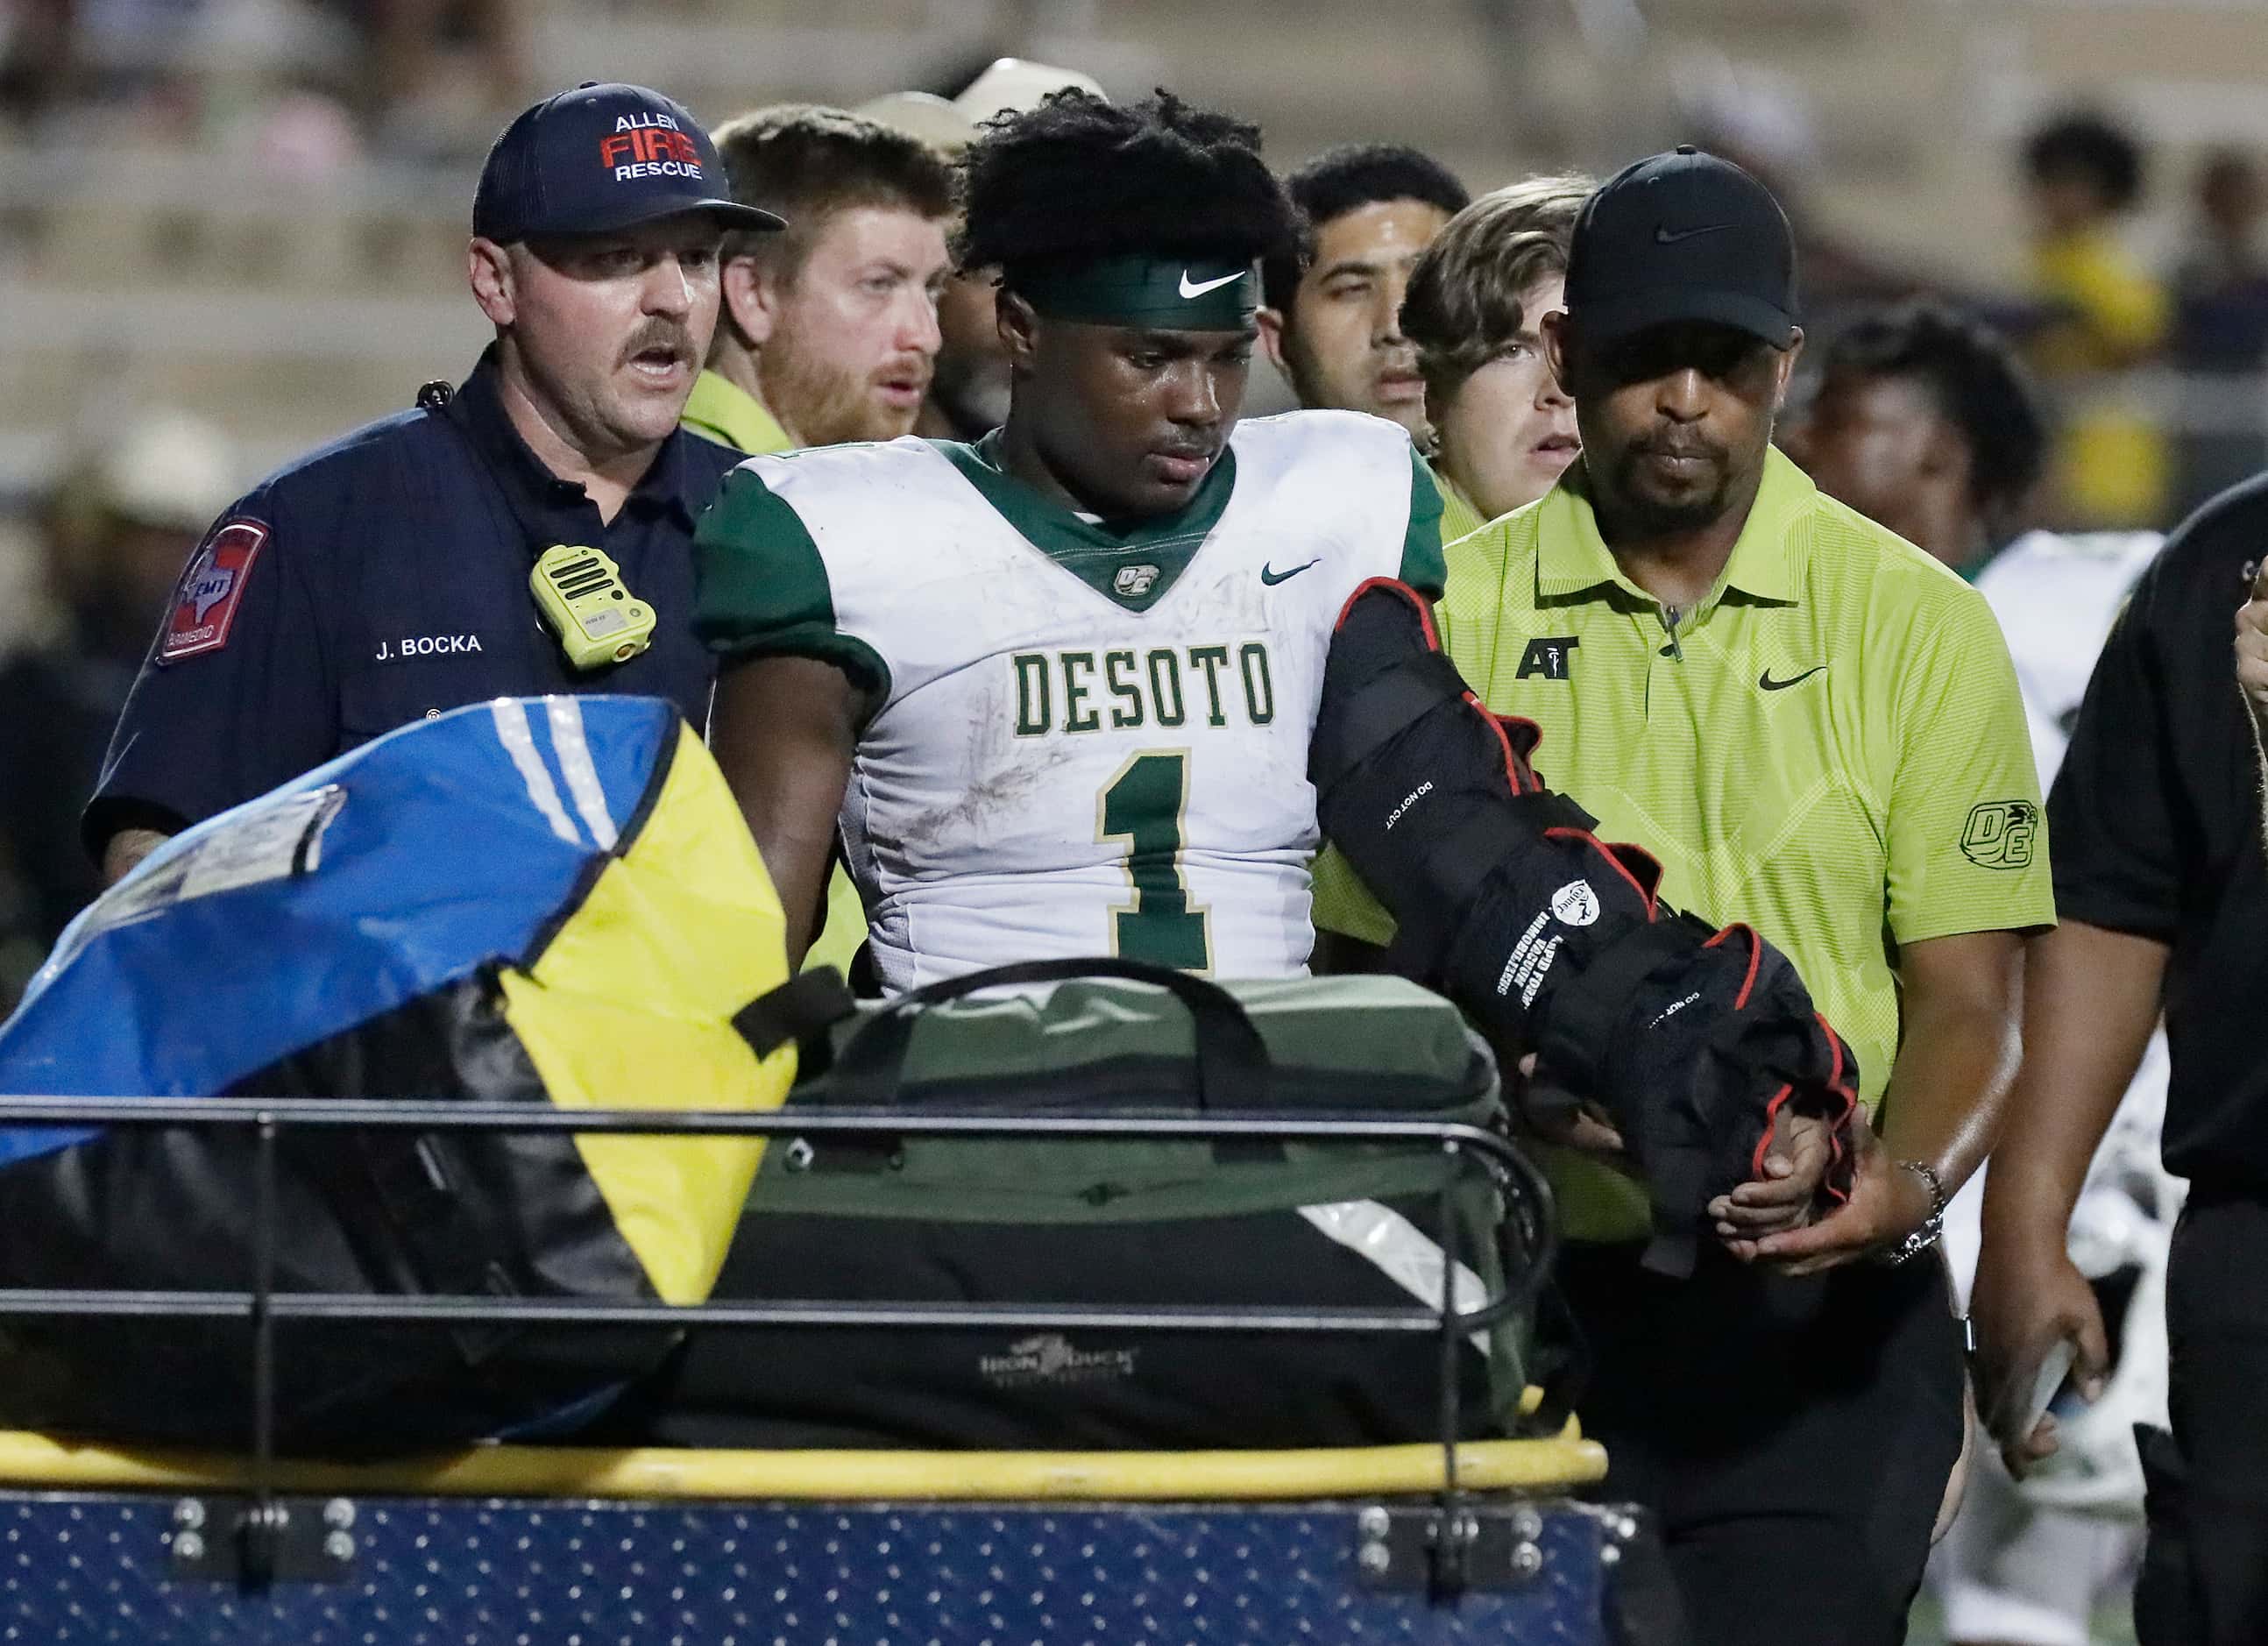 DeSoto High School running back Deondrae Riden jr. (1) was carted off of the field with his...